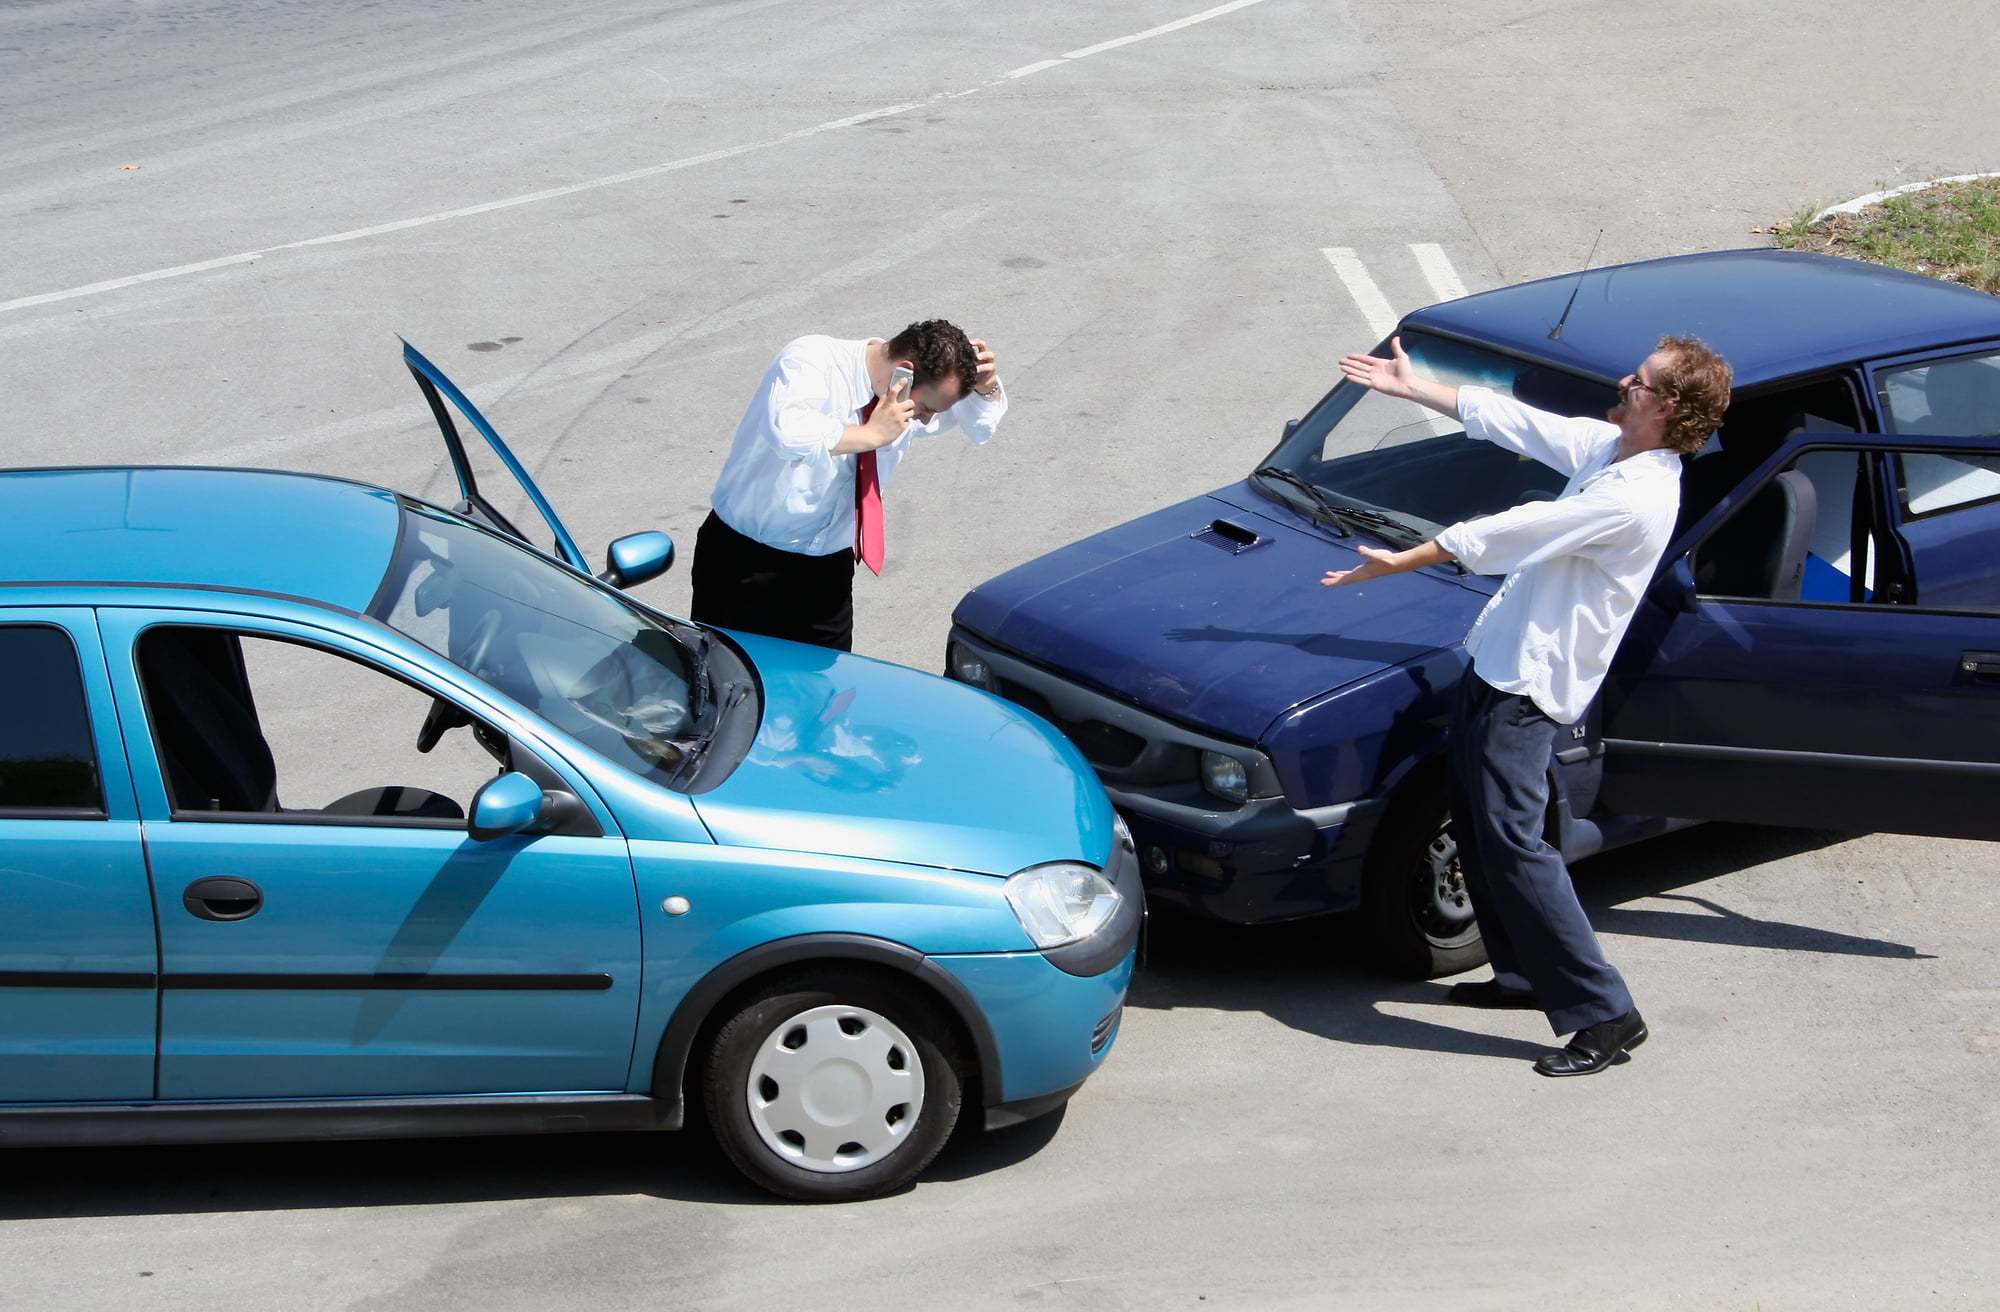 Whether it's unsafe, distracted, or drunk driving, car crashes happen for a variety of reasons. Learn about the common types of car accidents.